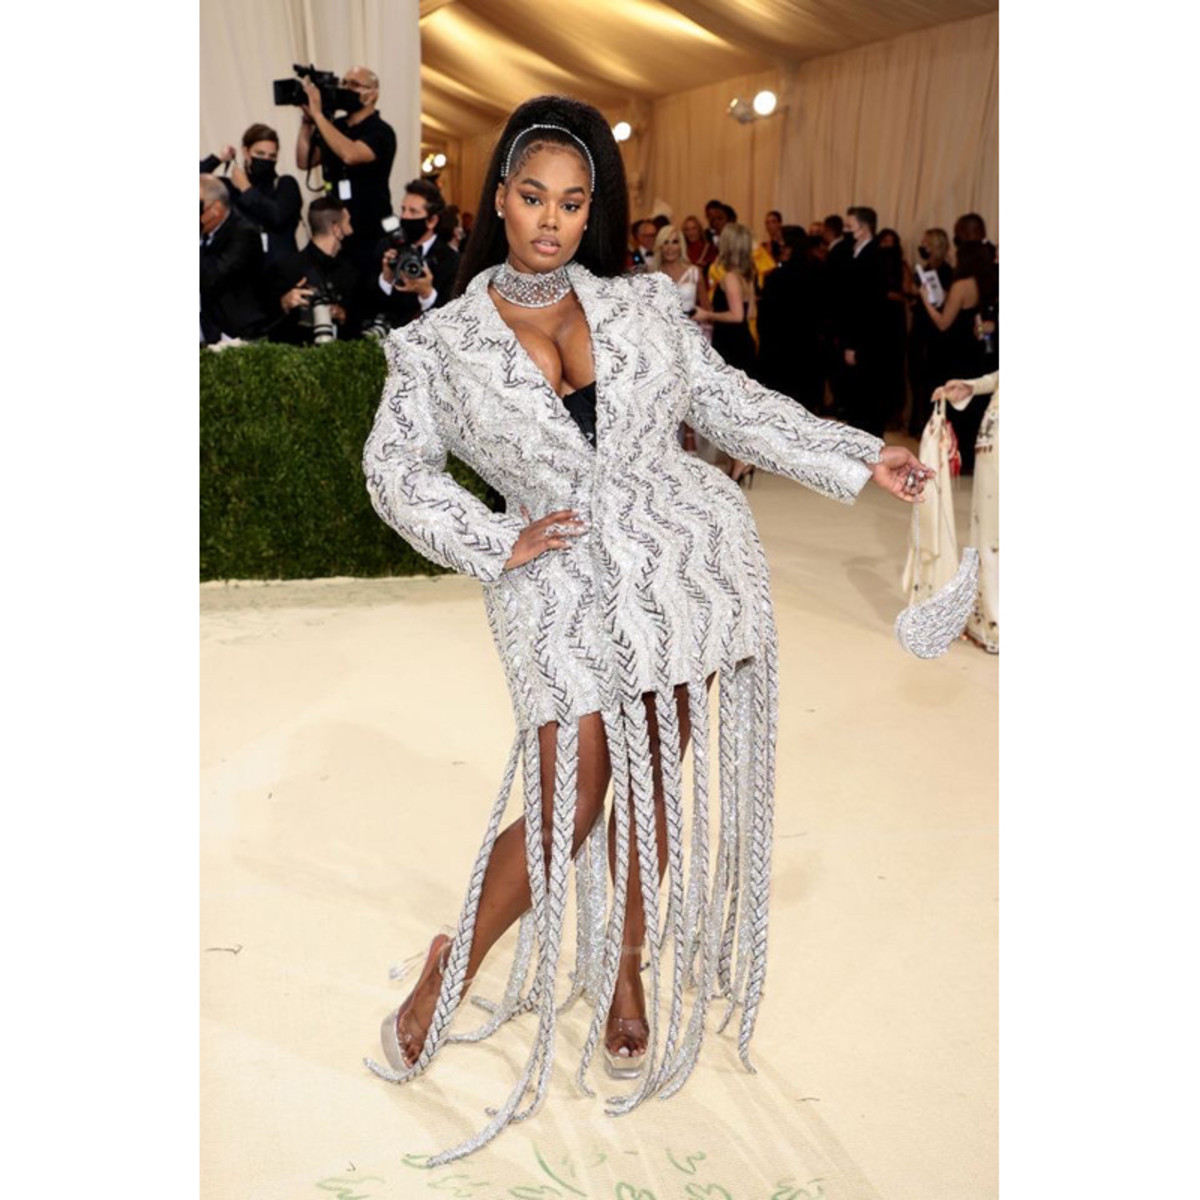 Precious Lee wears AREA and a ponytail snatched by celeb stylist Mideyah Parker to the Met Gala 2021.